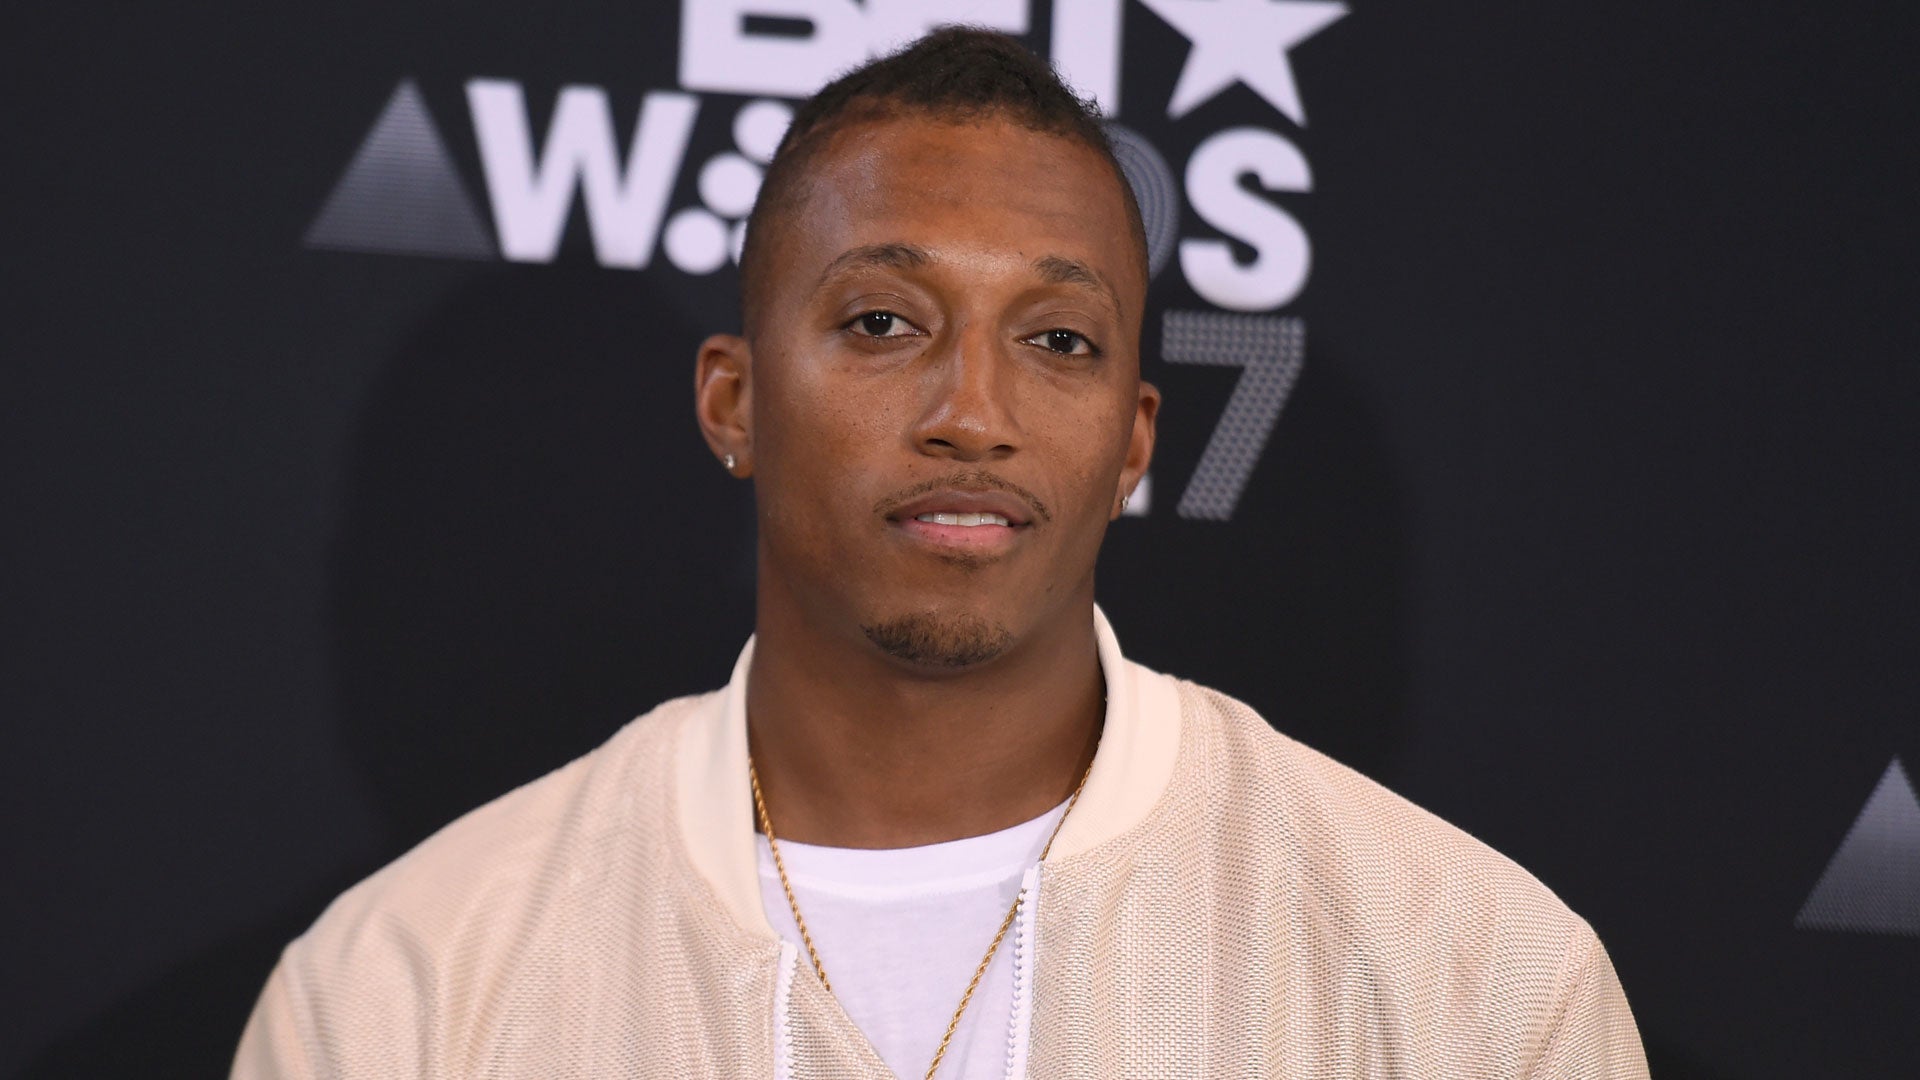 Akvarium overtro Svaghed Immersed into Christ': Christian Rapper Lecrae Baptized in Jordan River,  Shares Video of 'Incredible' Experience | CBN News